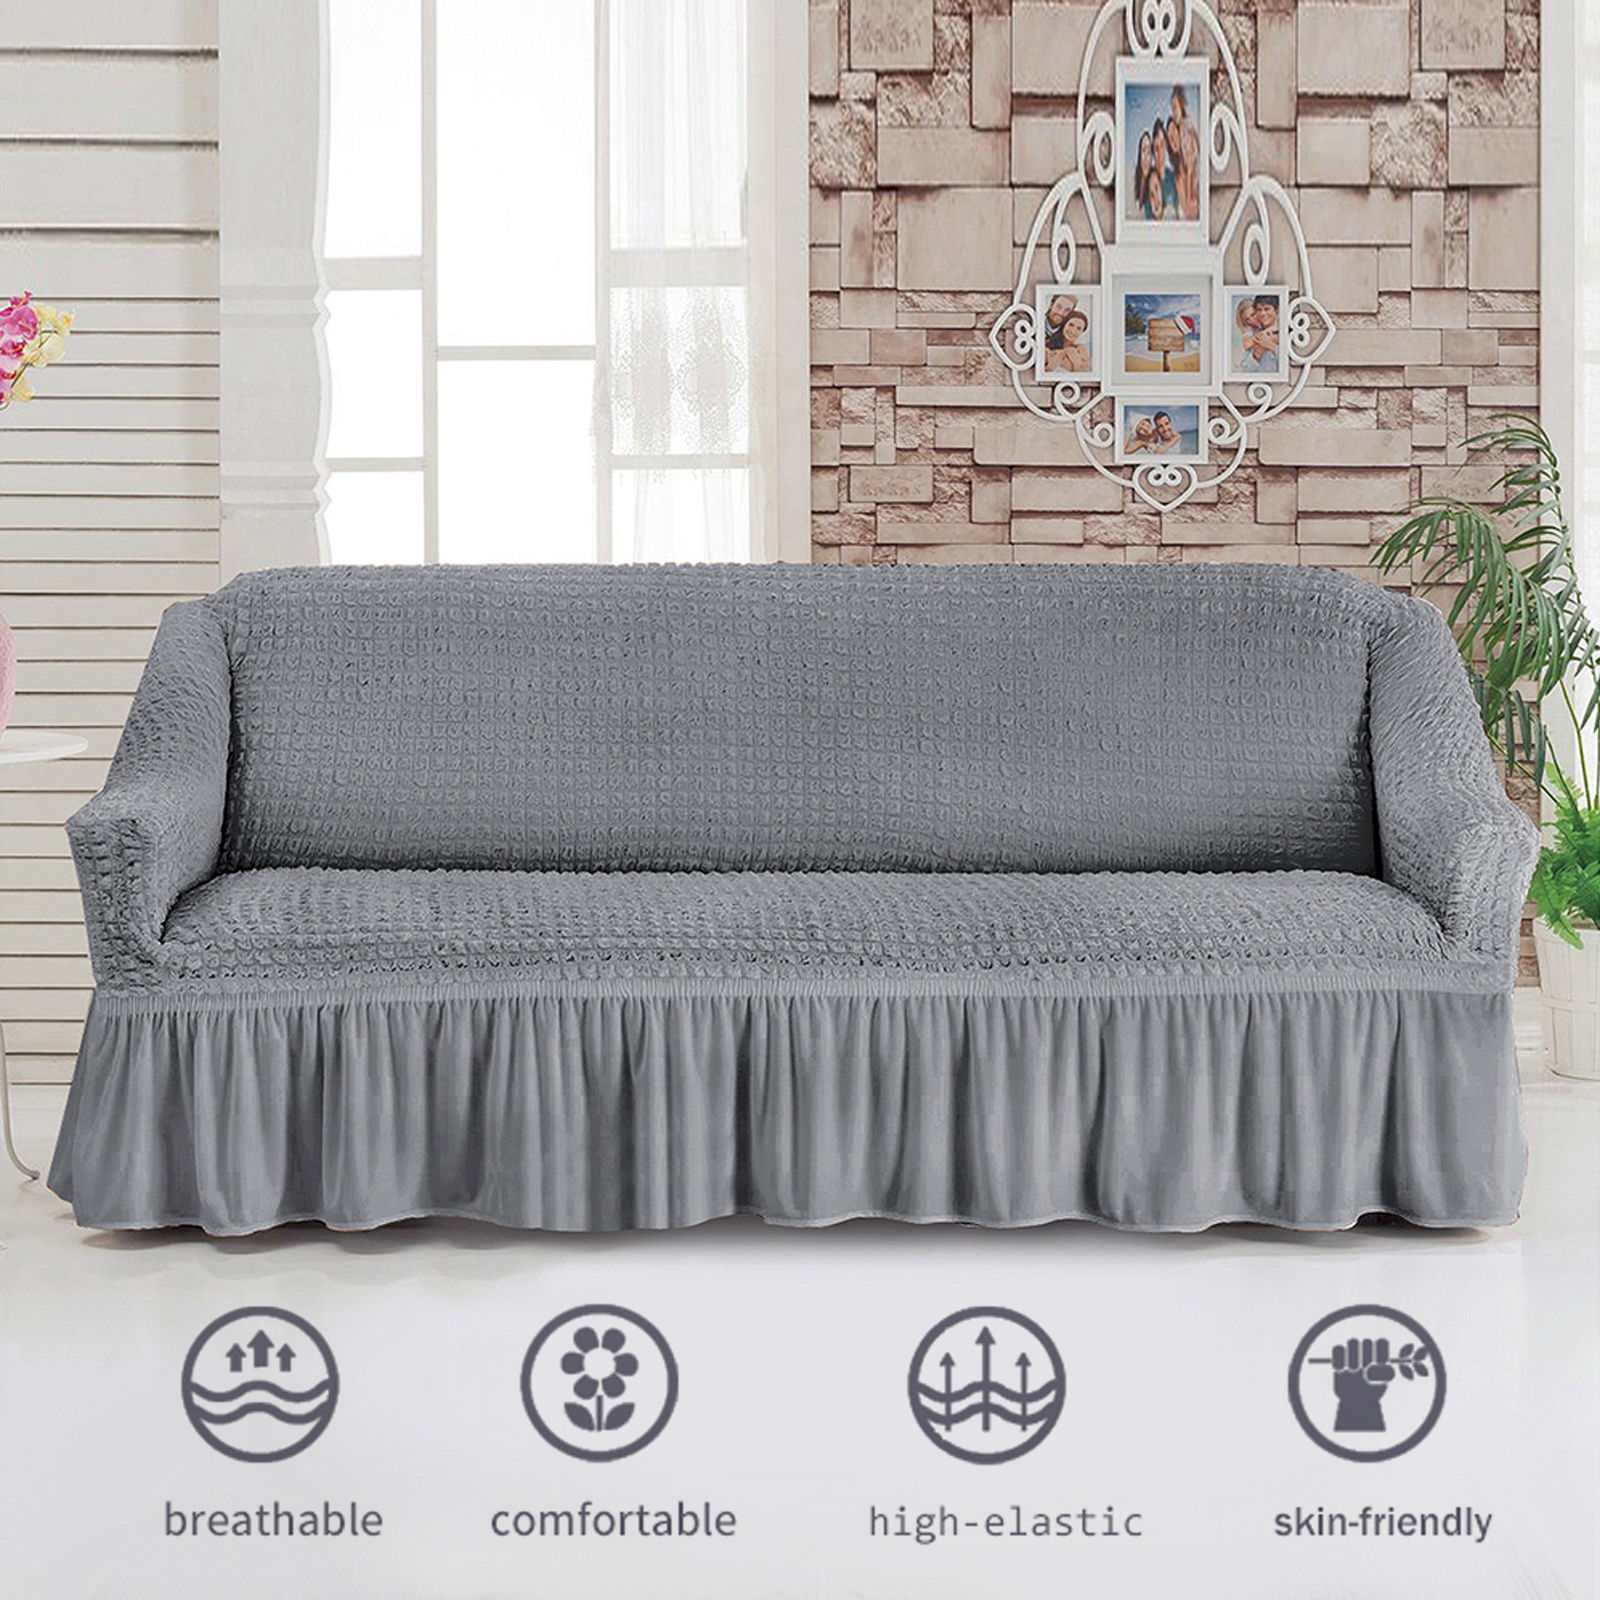 Stretch Sofa Slipcover, 3 Seater Sofa Slipcovers With Skirt With Armless Soft Sofa Cover Elastic Straps Sofa Slipcover For Living Room Kids Pets-Gray B-X-Large